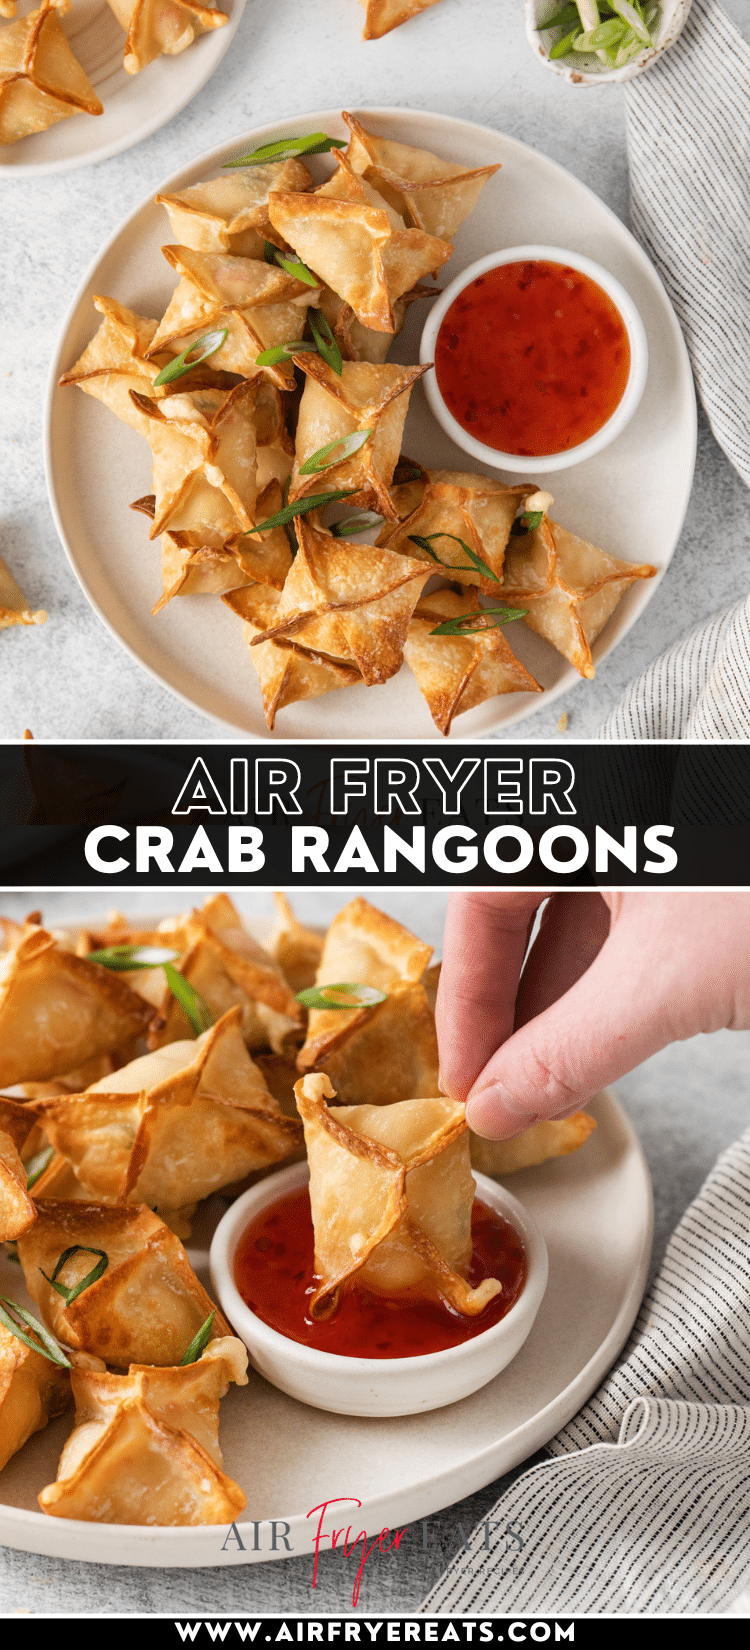 Learn how to make Air Fryer Crab Rangoon - Your favorite crispy wontons filled with crab and seasoned cream cheese. Skip the takeout Chinese food and make homemade Crab Rangoon in the Air Fryer instead. via @vegetarianmamma